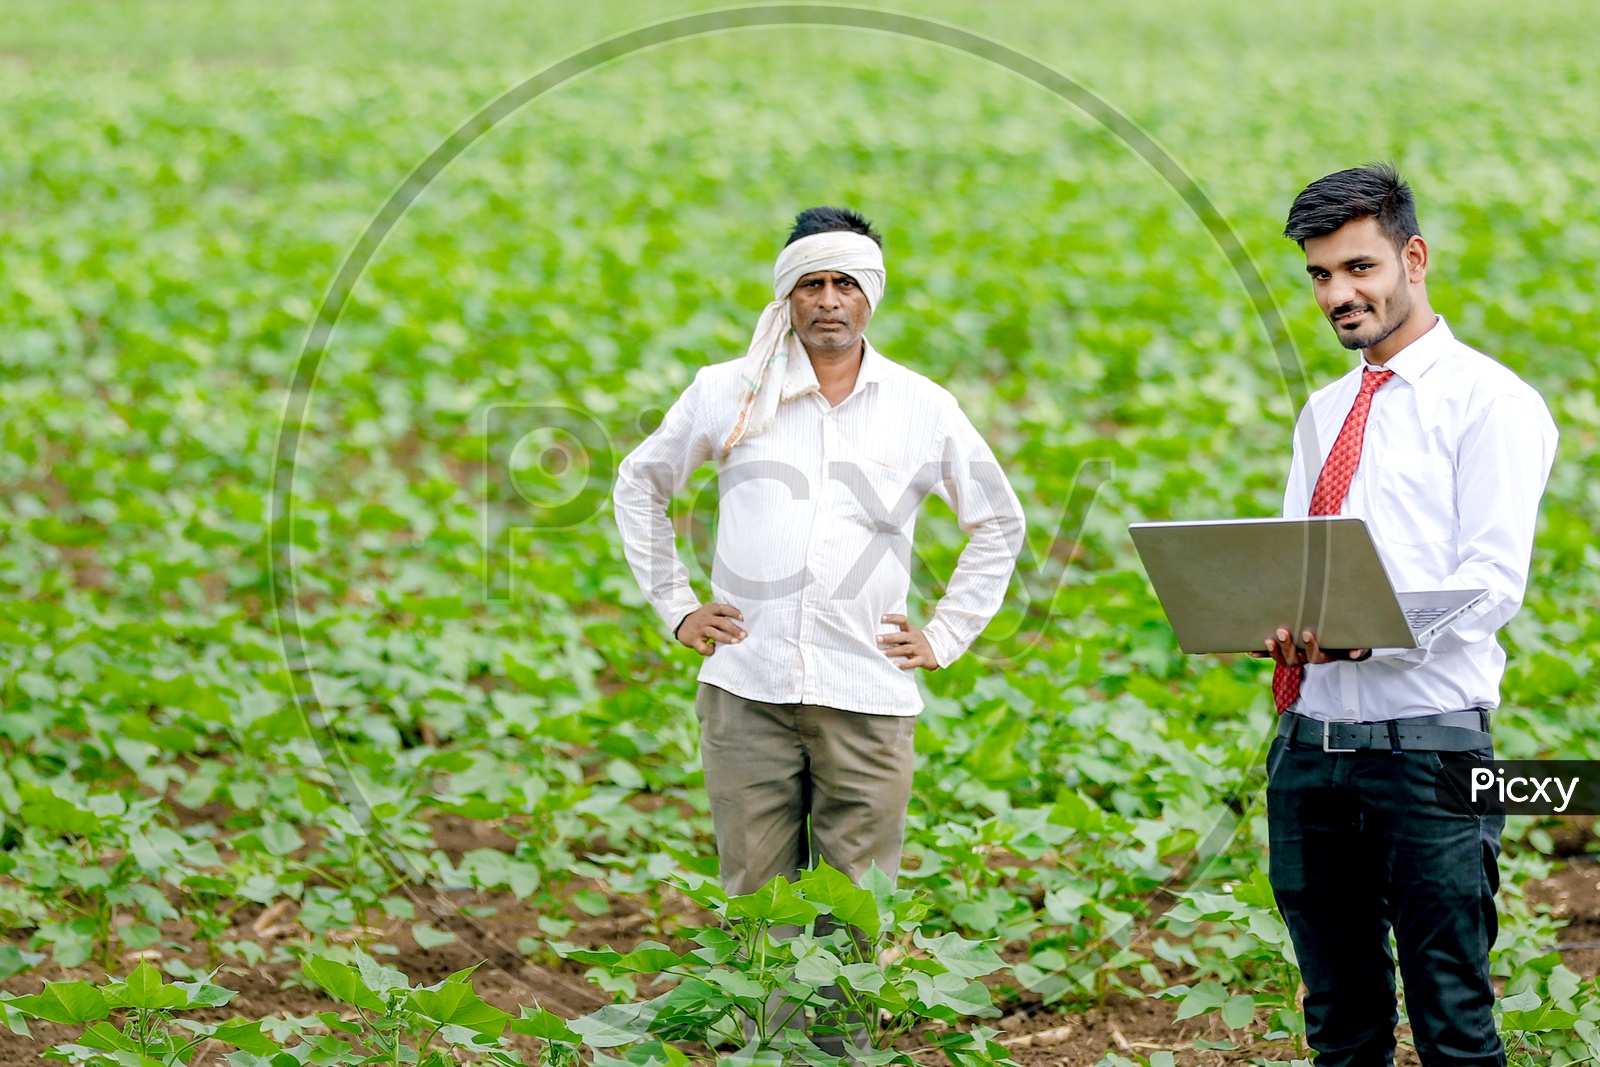 Indian Young Professional With a laptop in Hand in Cotton Field Along With Farmer